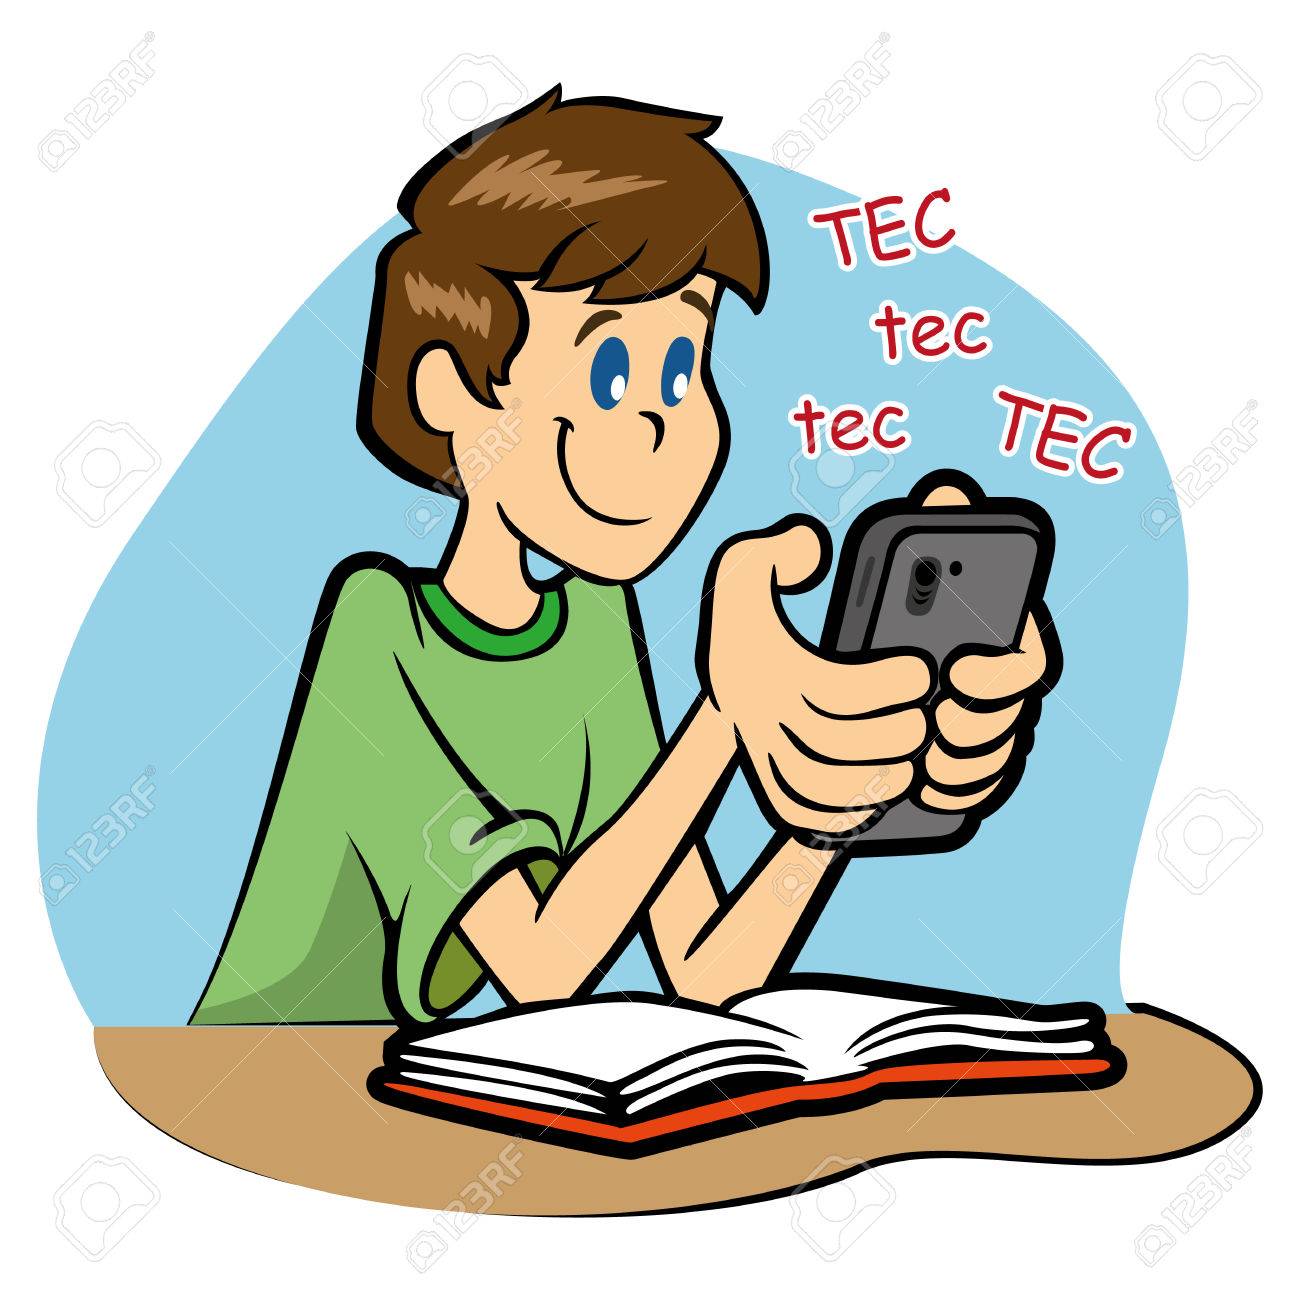 Student Using Phone Clipart & Free Clip Art Images #28240.